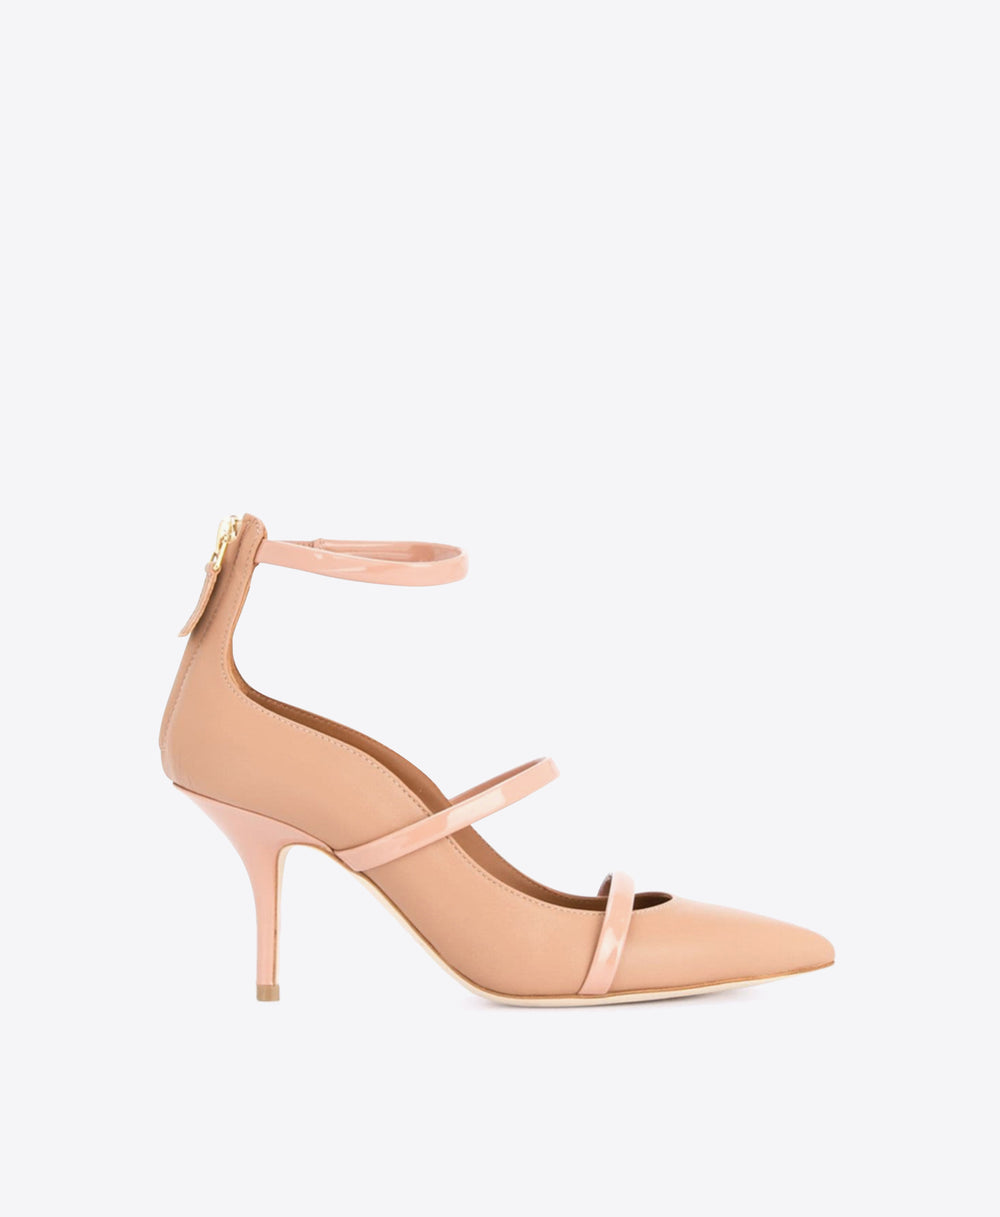 Women's Nude & Pink Patent Leather Pumps with Heel Malone Souliers